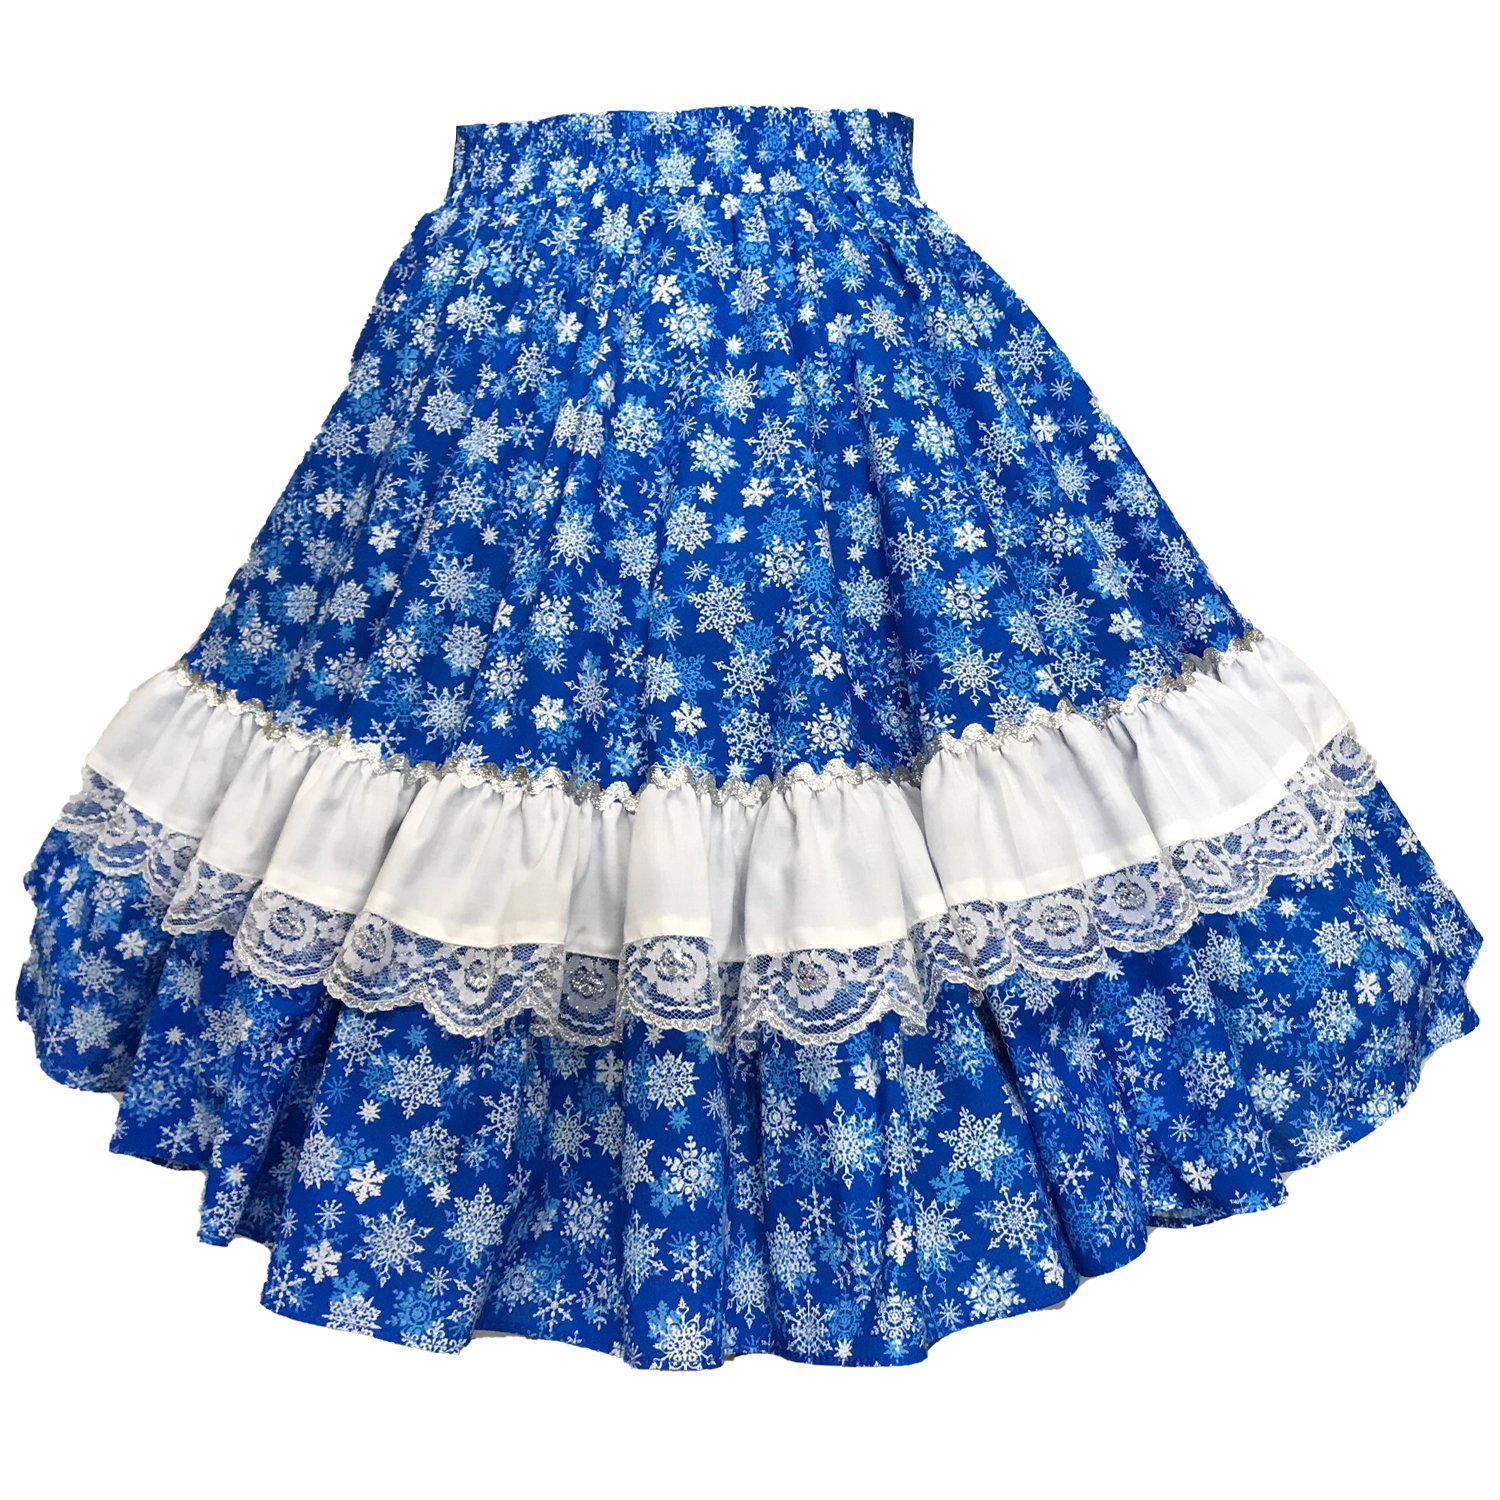 A blue and white snowflake Holiday Glitter Square Dance Skirt with ruffles from Square Up Fashions.